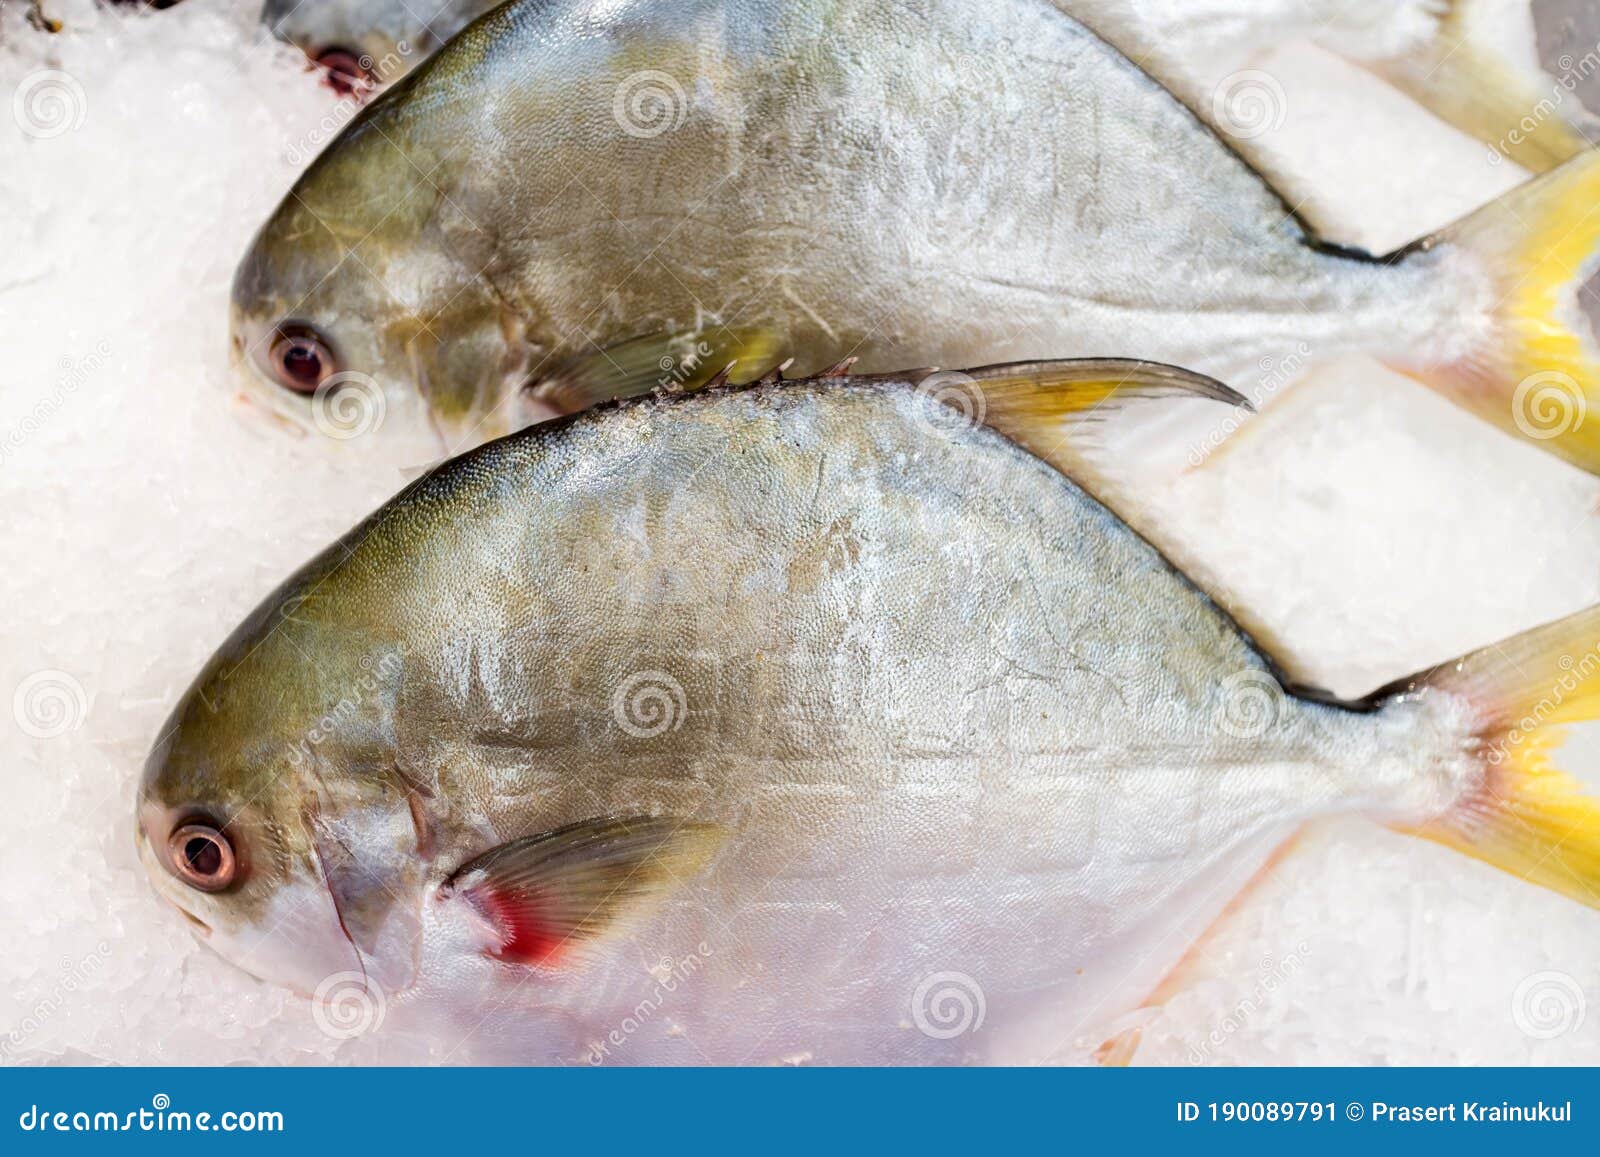 pacu, characidae fish on ice saling in market